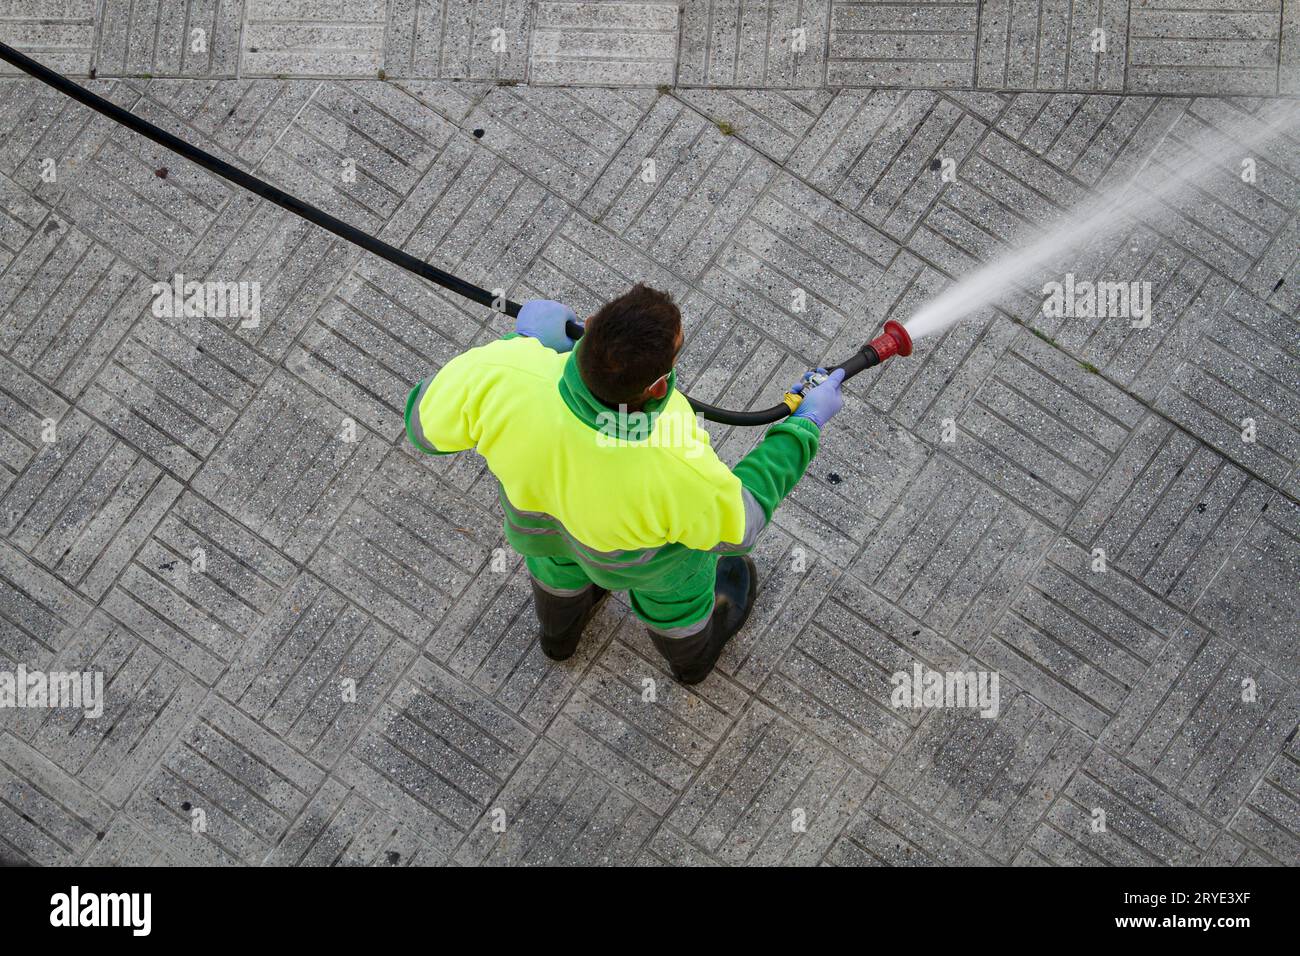 Worker holding a hose cleaning the sidewalk with water Stock Photo